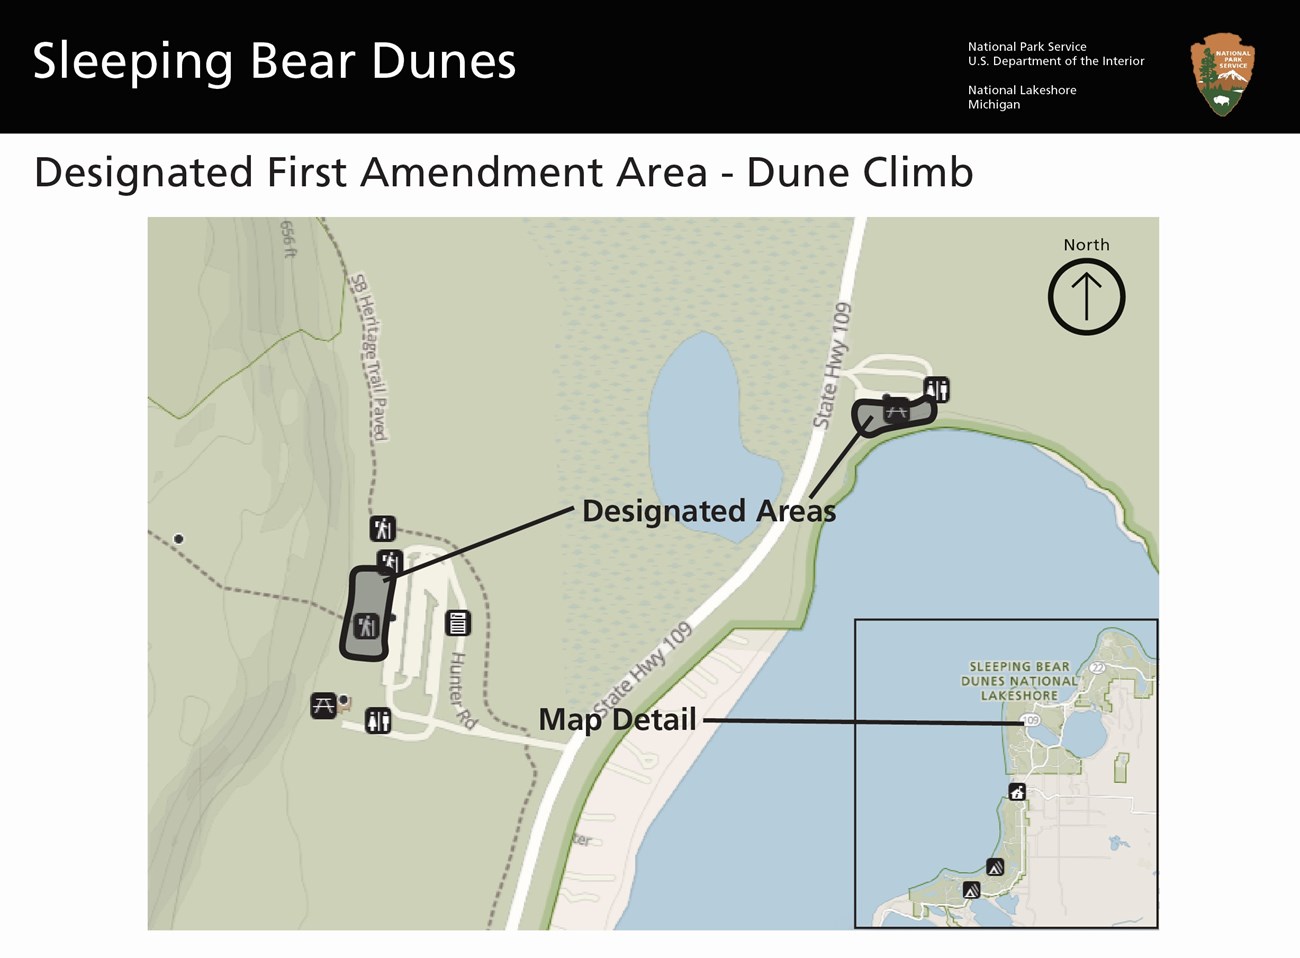 A map of the Dune Climb Area. A section on the west side of the Dune Climb parking lot is marked in grey. A section south of the Glen Lake Picnic Area is marked in grey. These area are the first amendment areas. There is a smaller inset map of the park.